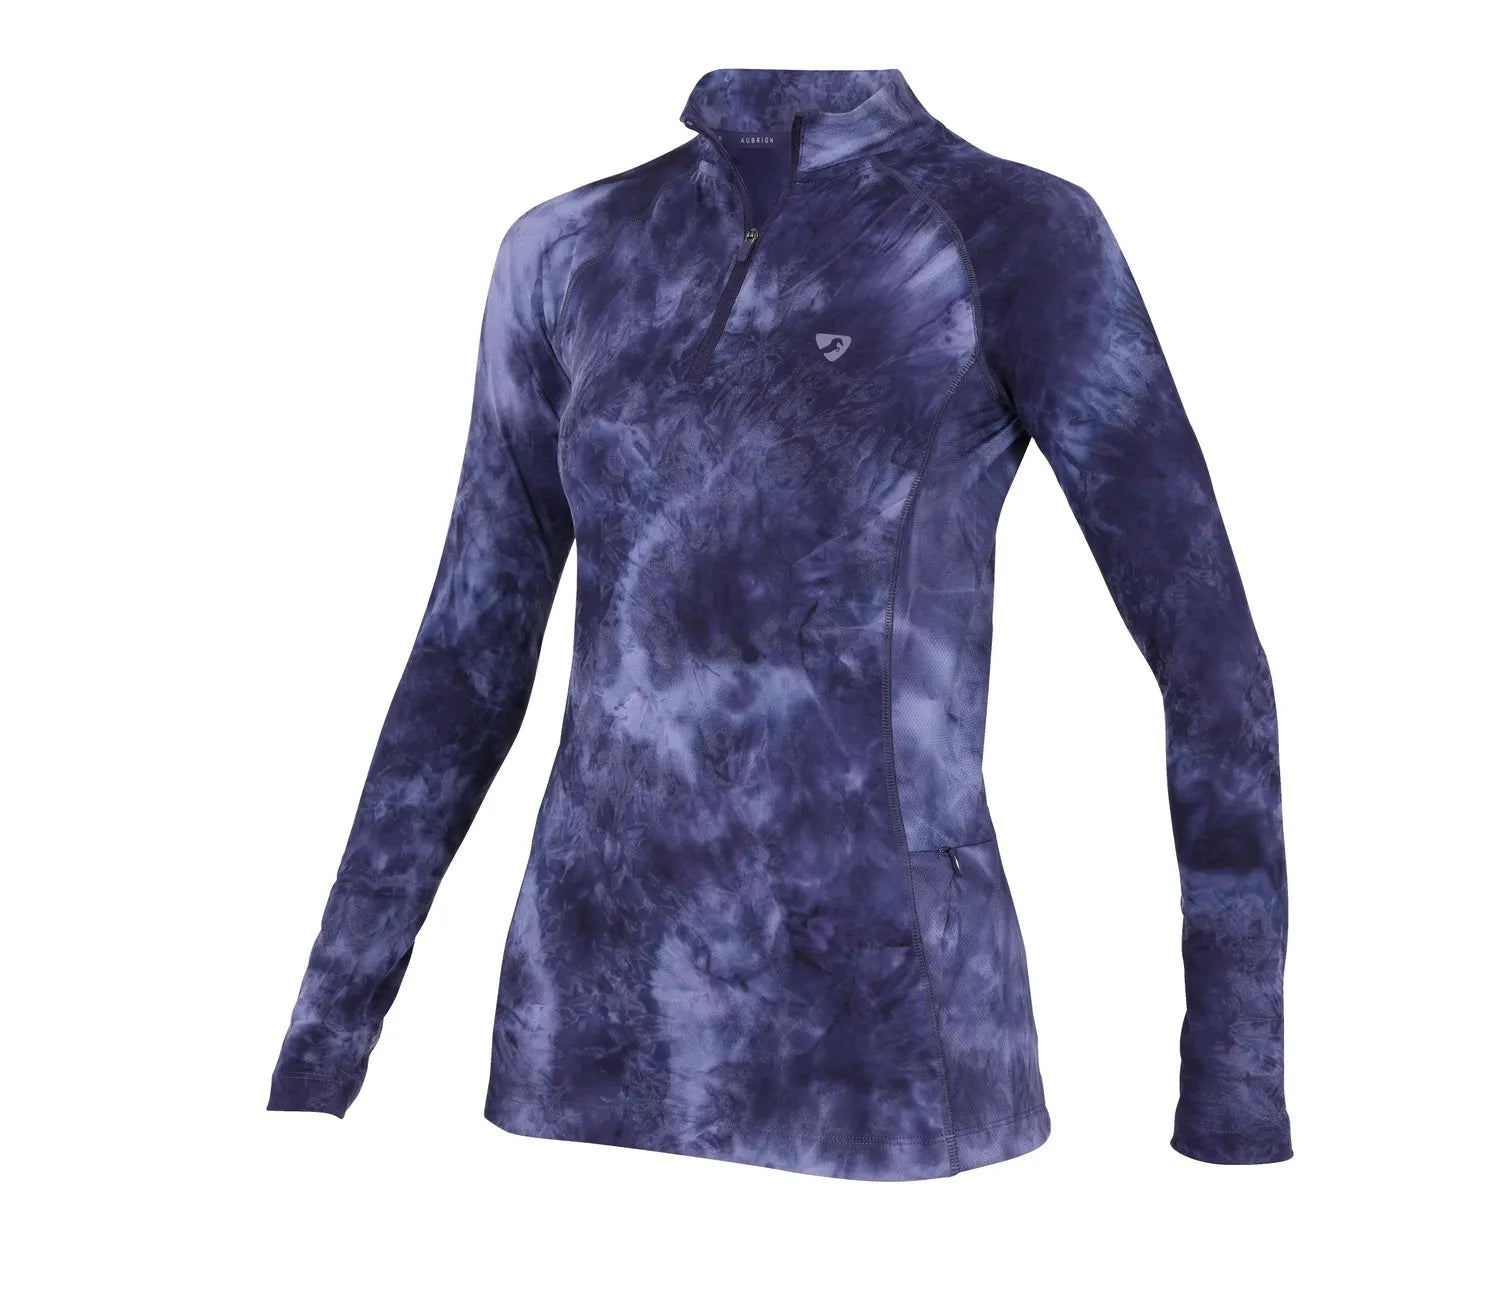 Aubrion Revive Long Sleeve Base Layer Navy Tie Dye